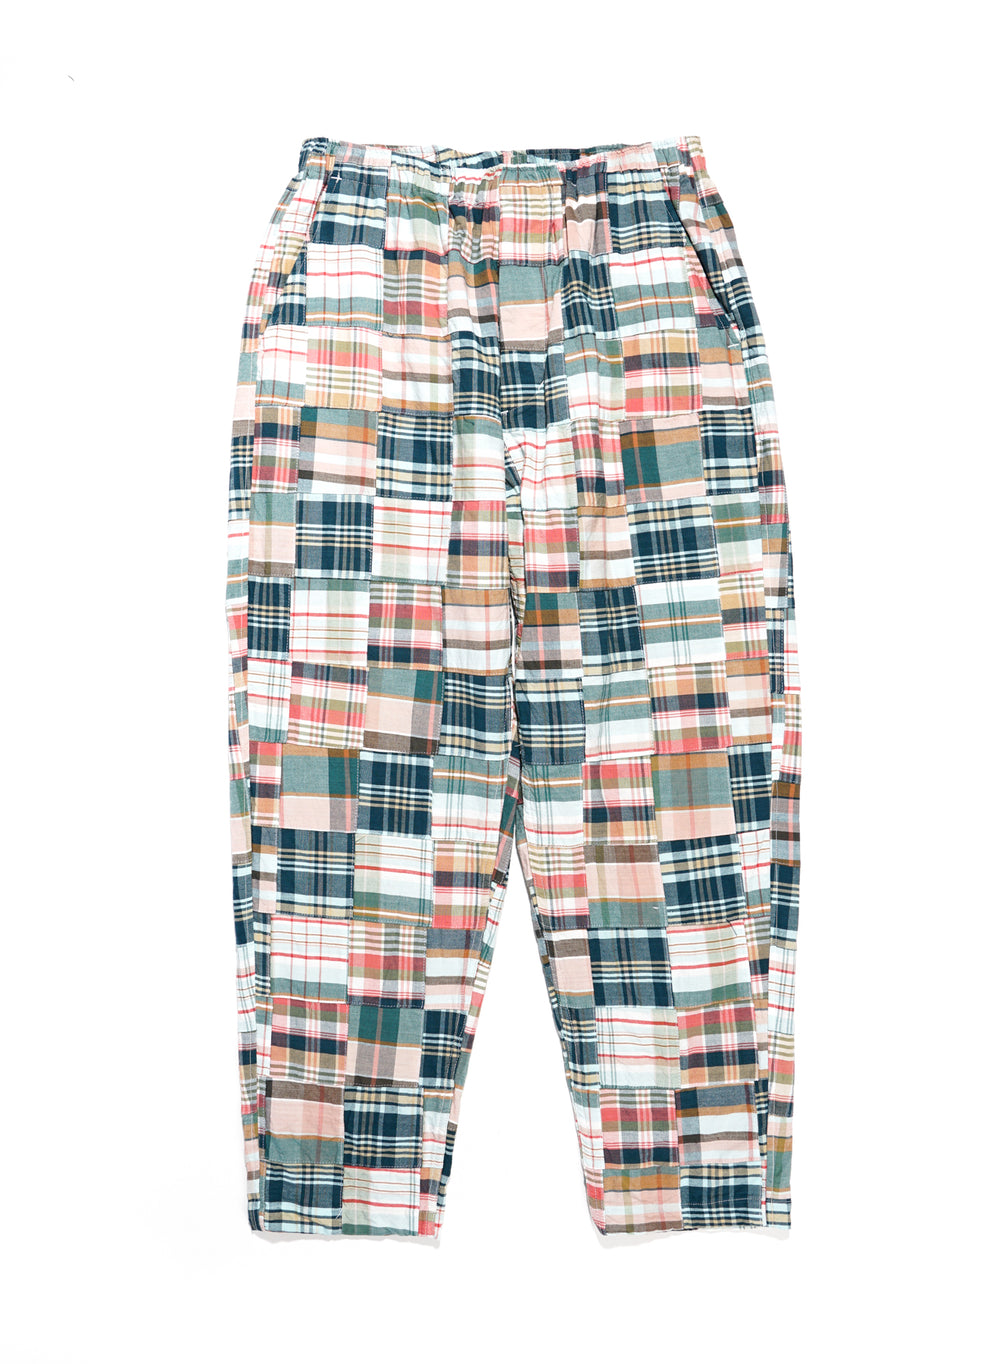 RandT Confy Pant - Green Cotton Patchwork Madras